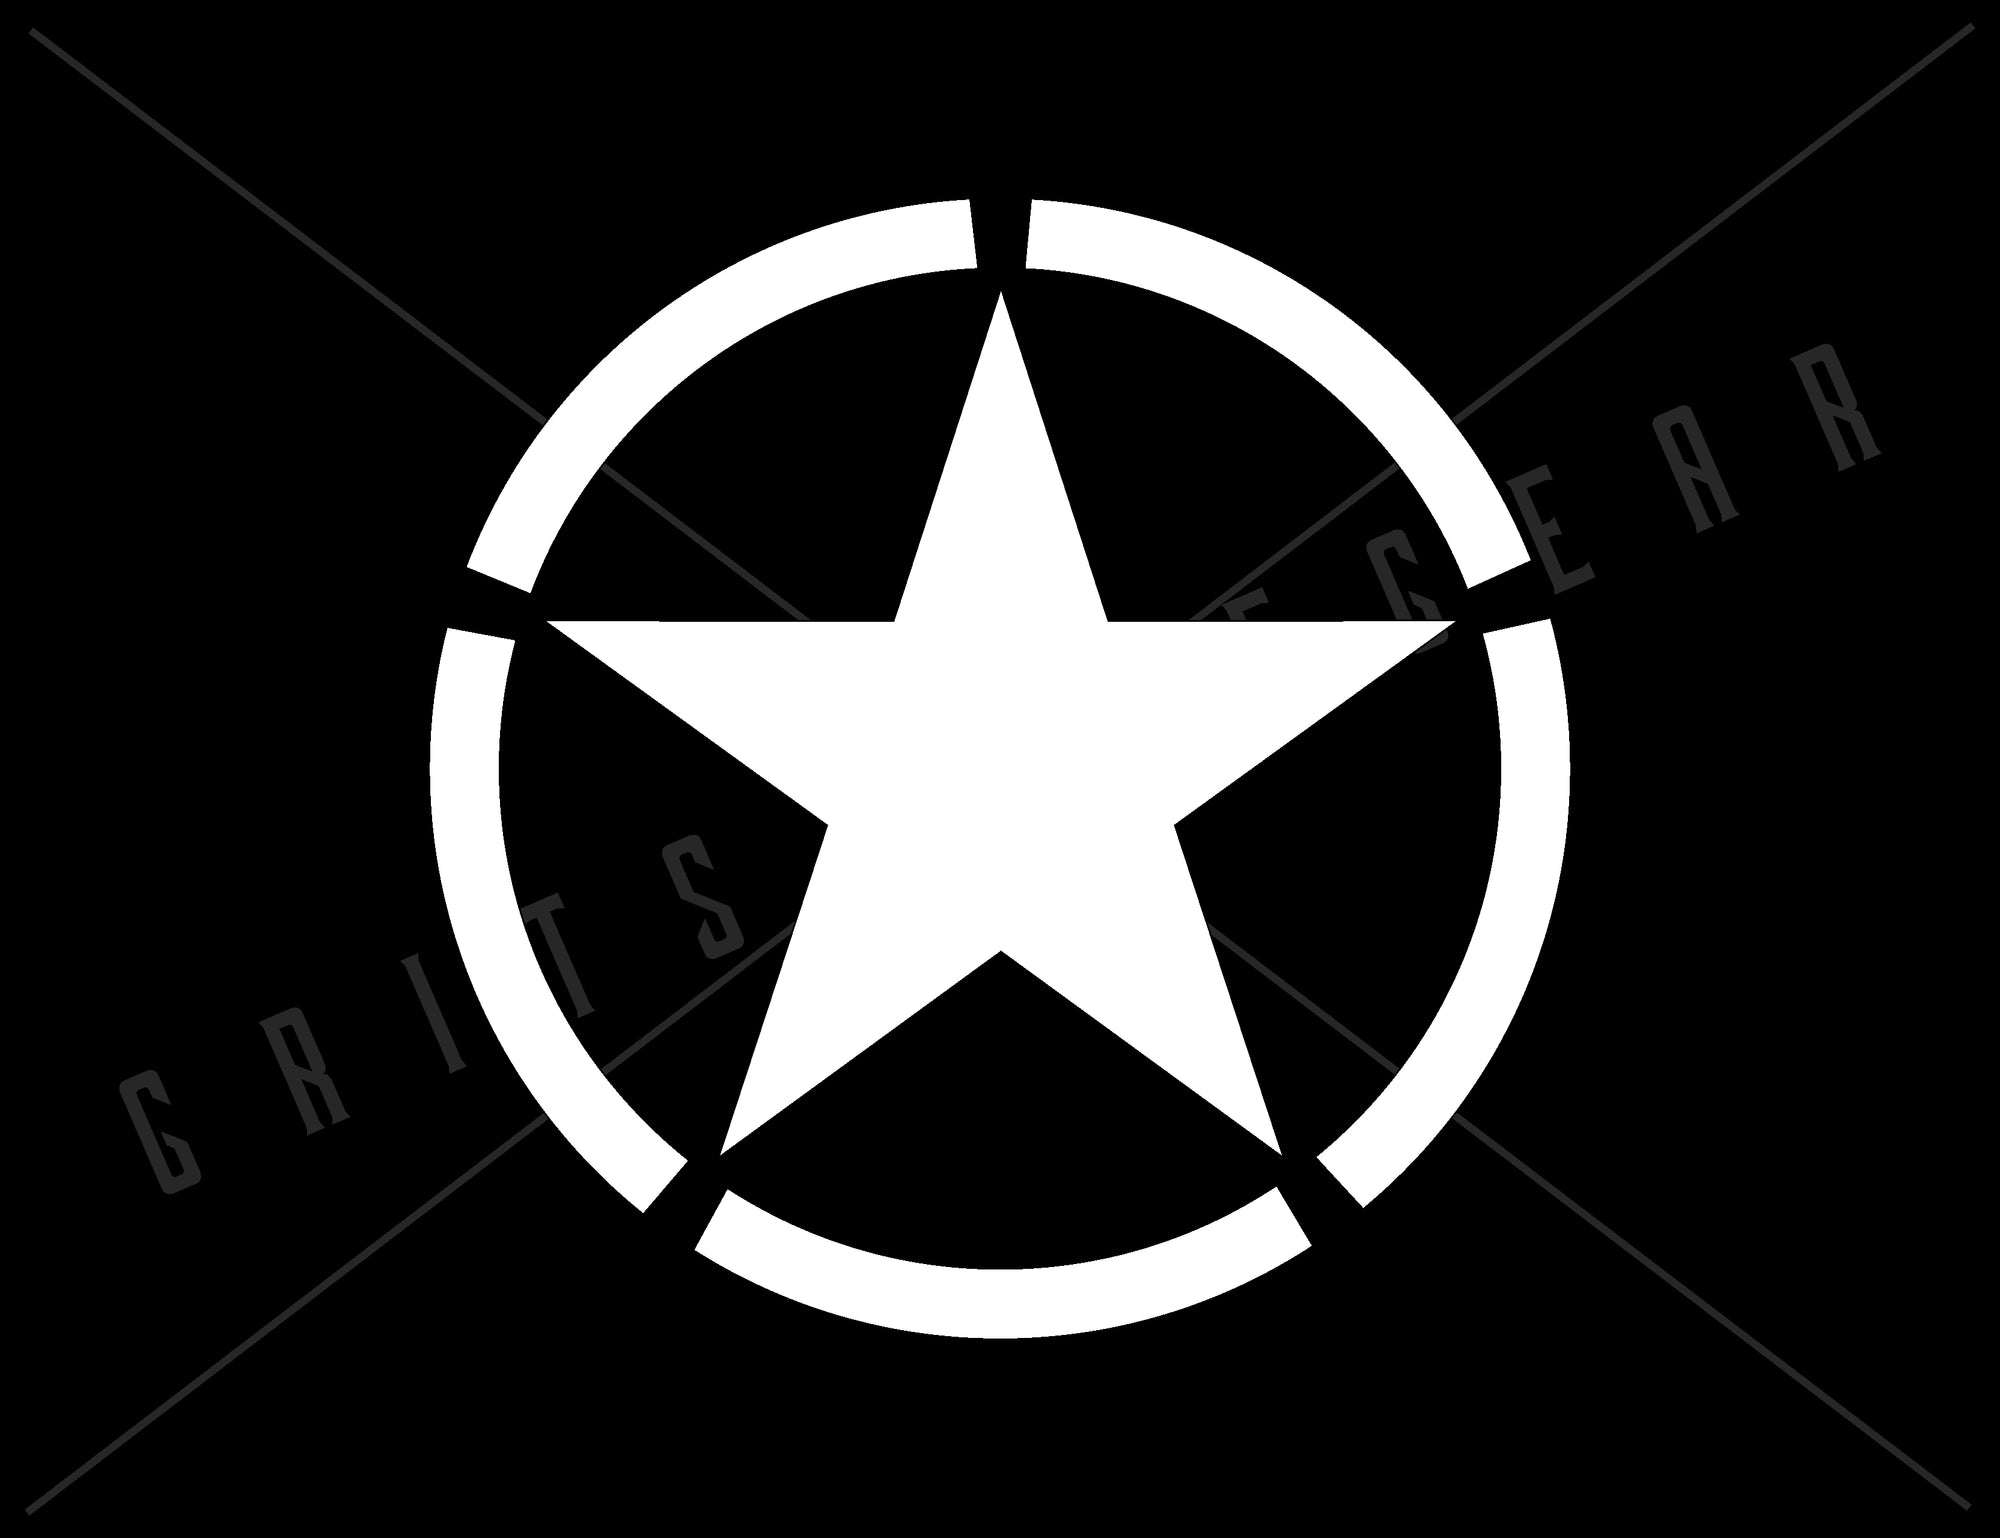 Invasion Jeep Star Vinyl Decal | Grit Style Gear